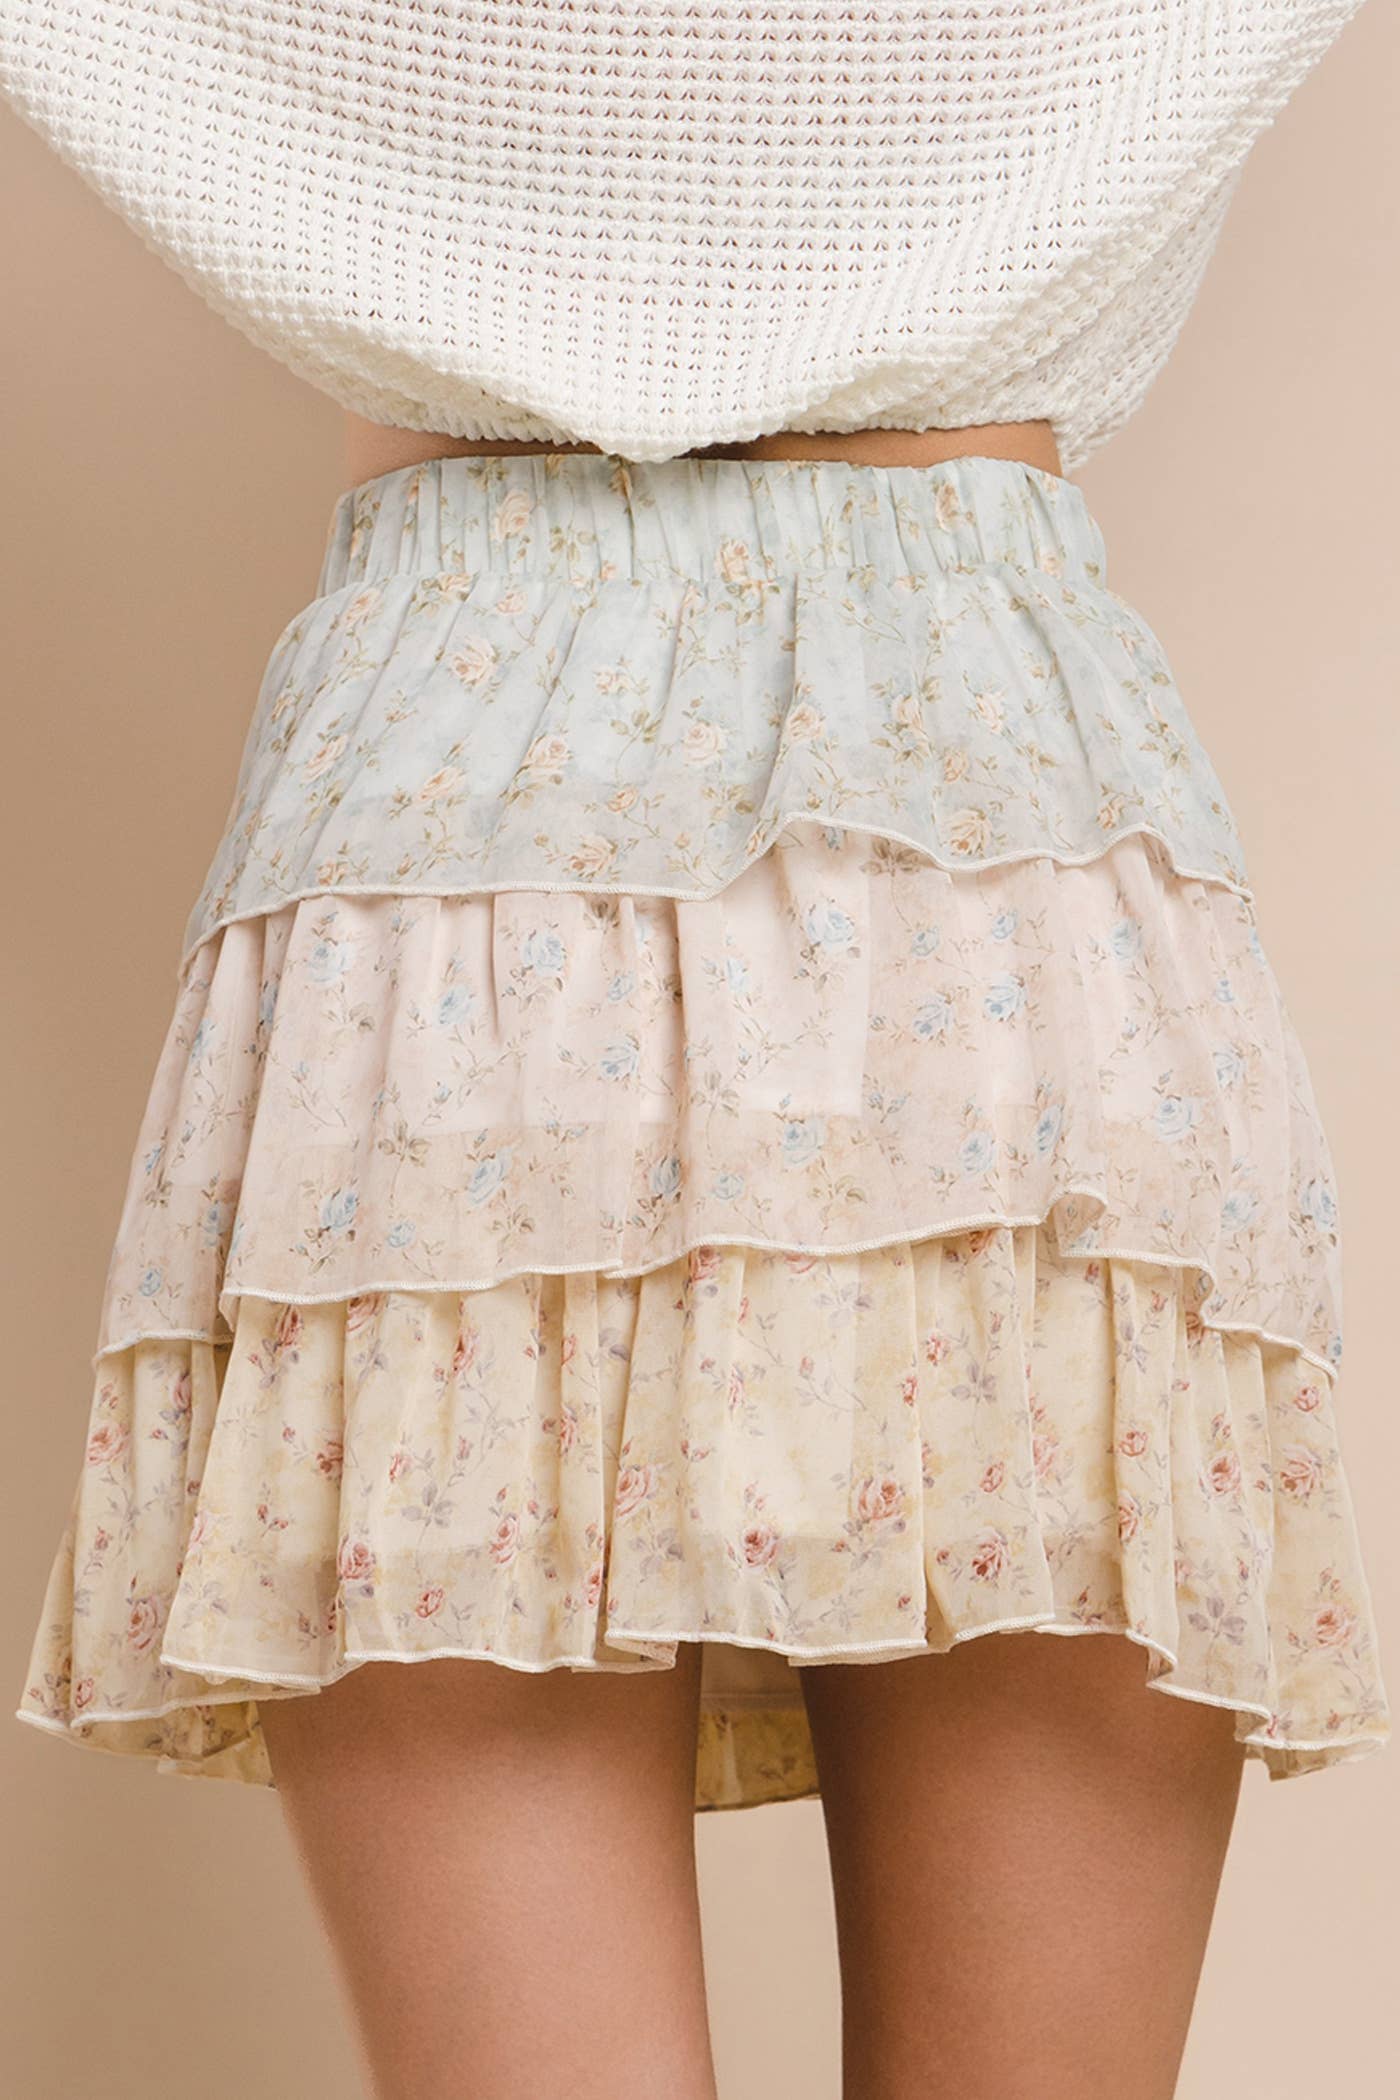 WL - ROMANCE TIERED MINI SKIRT WITH DITSY FLORAL PRINT